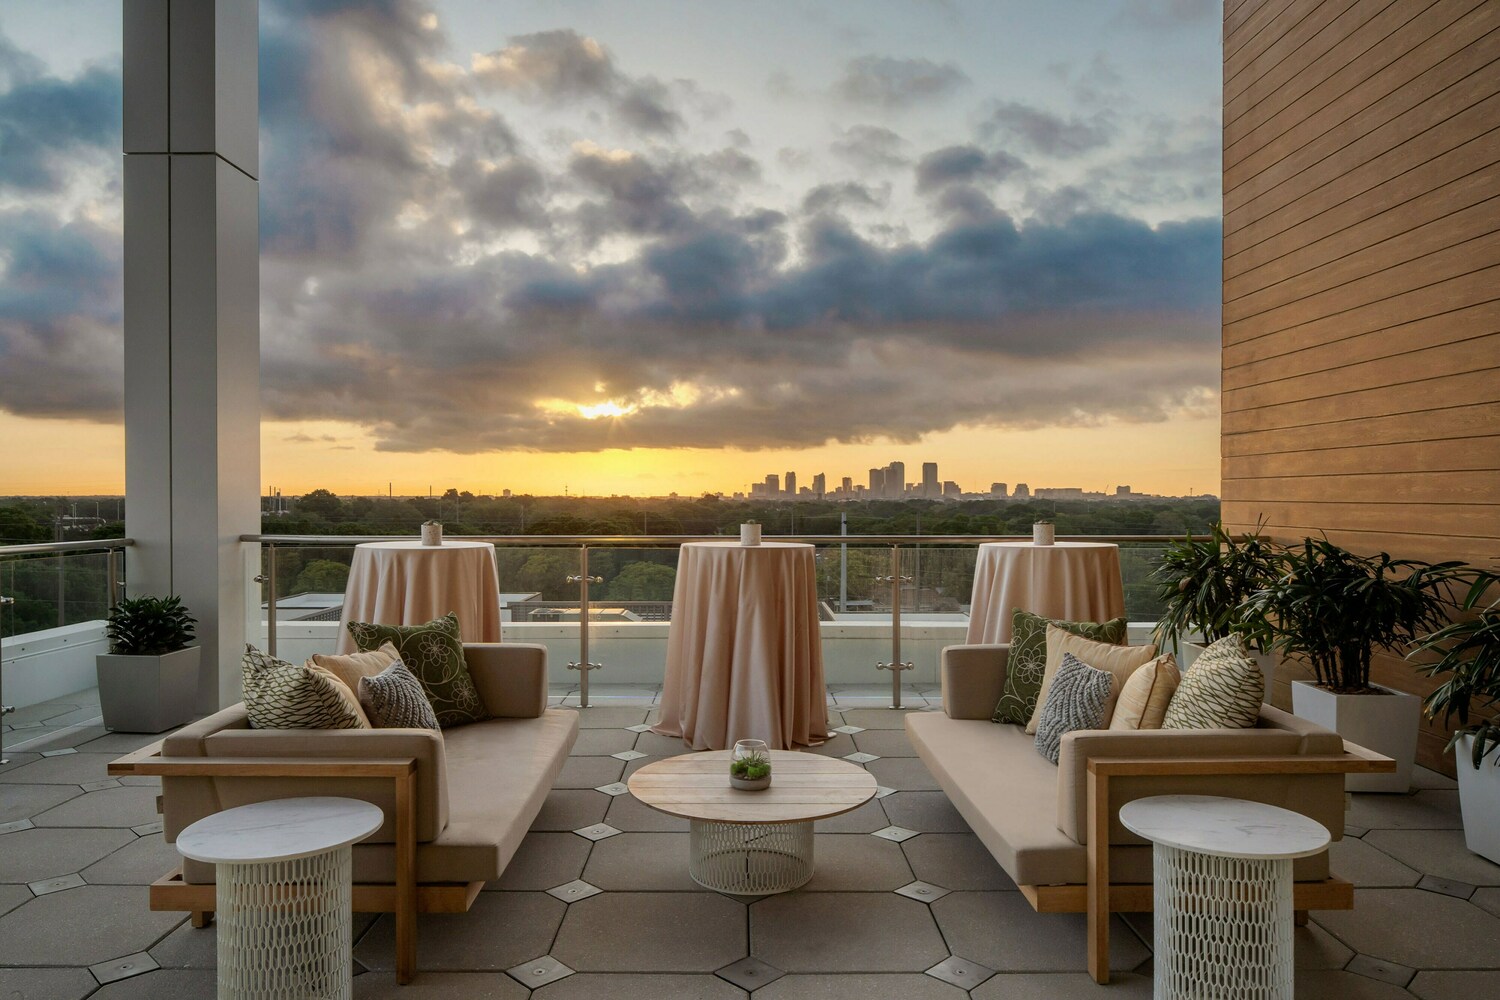 Skydeck pre-function area offers a lovely outdoor terrace with terrific views of downtown Tampa, ideal for receptions